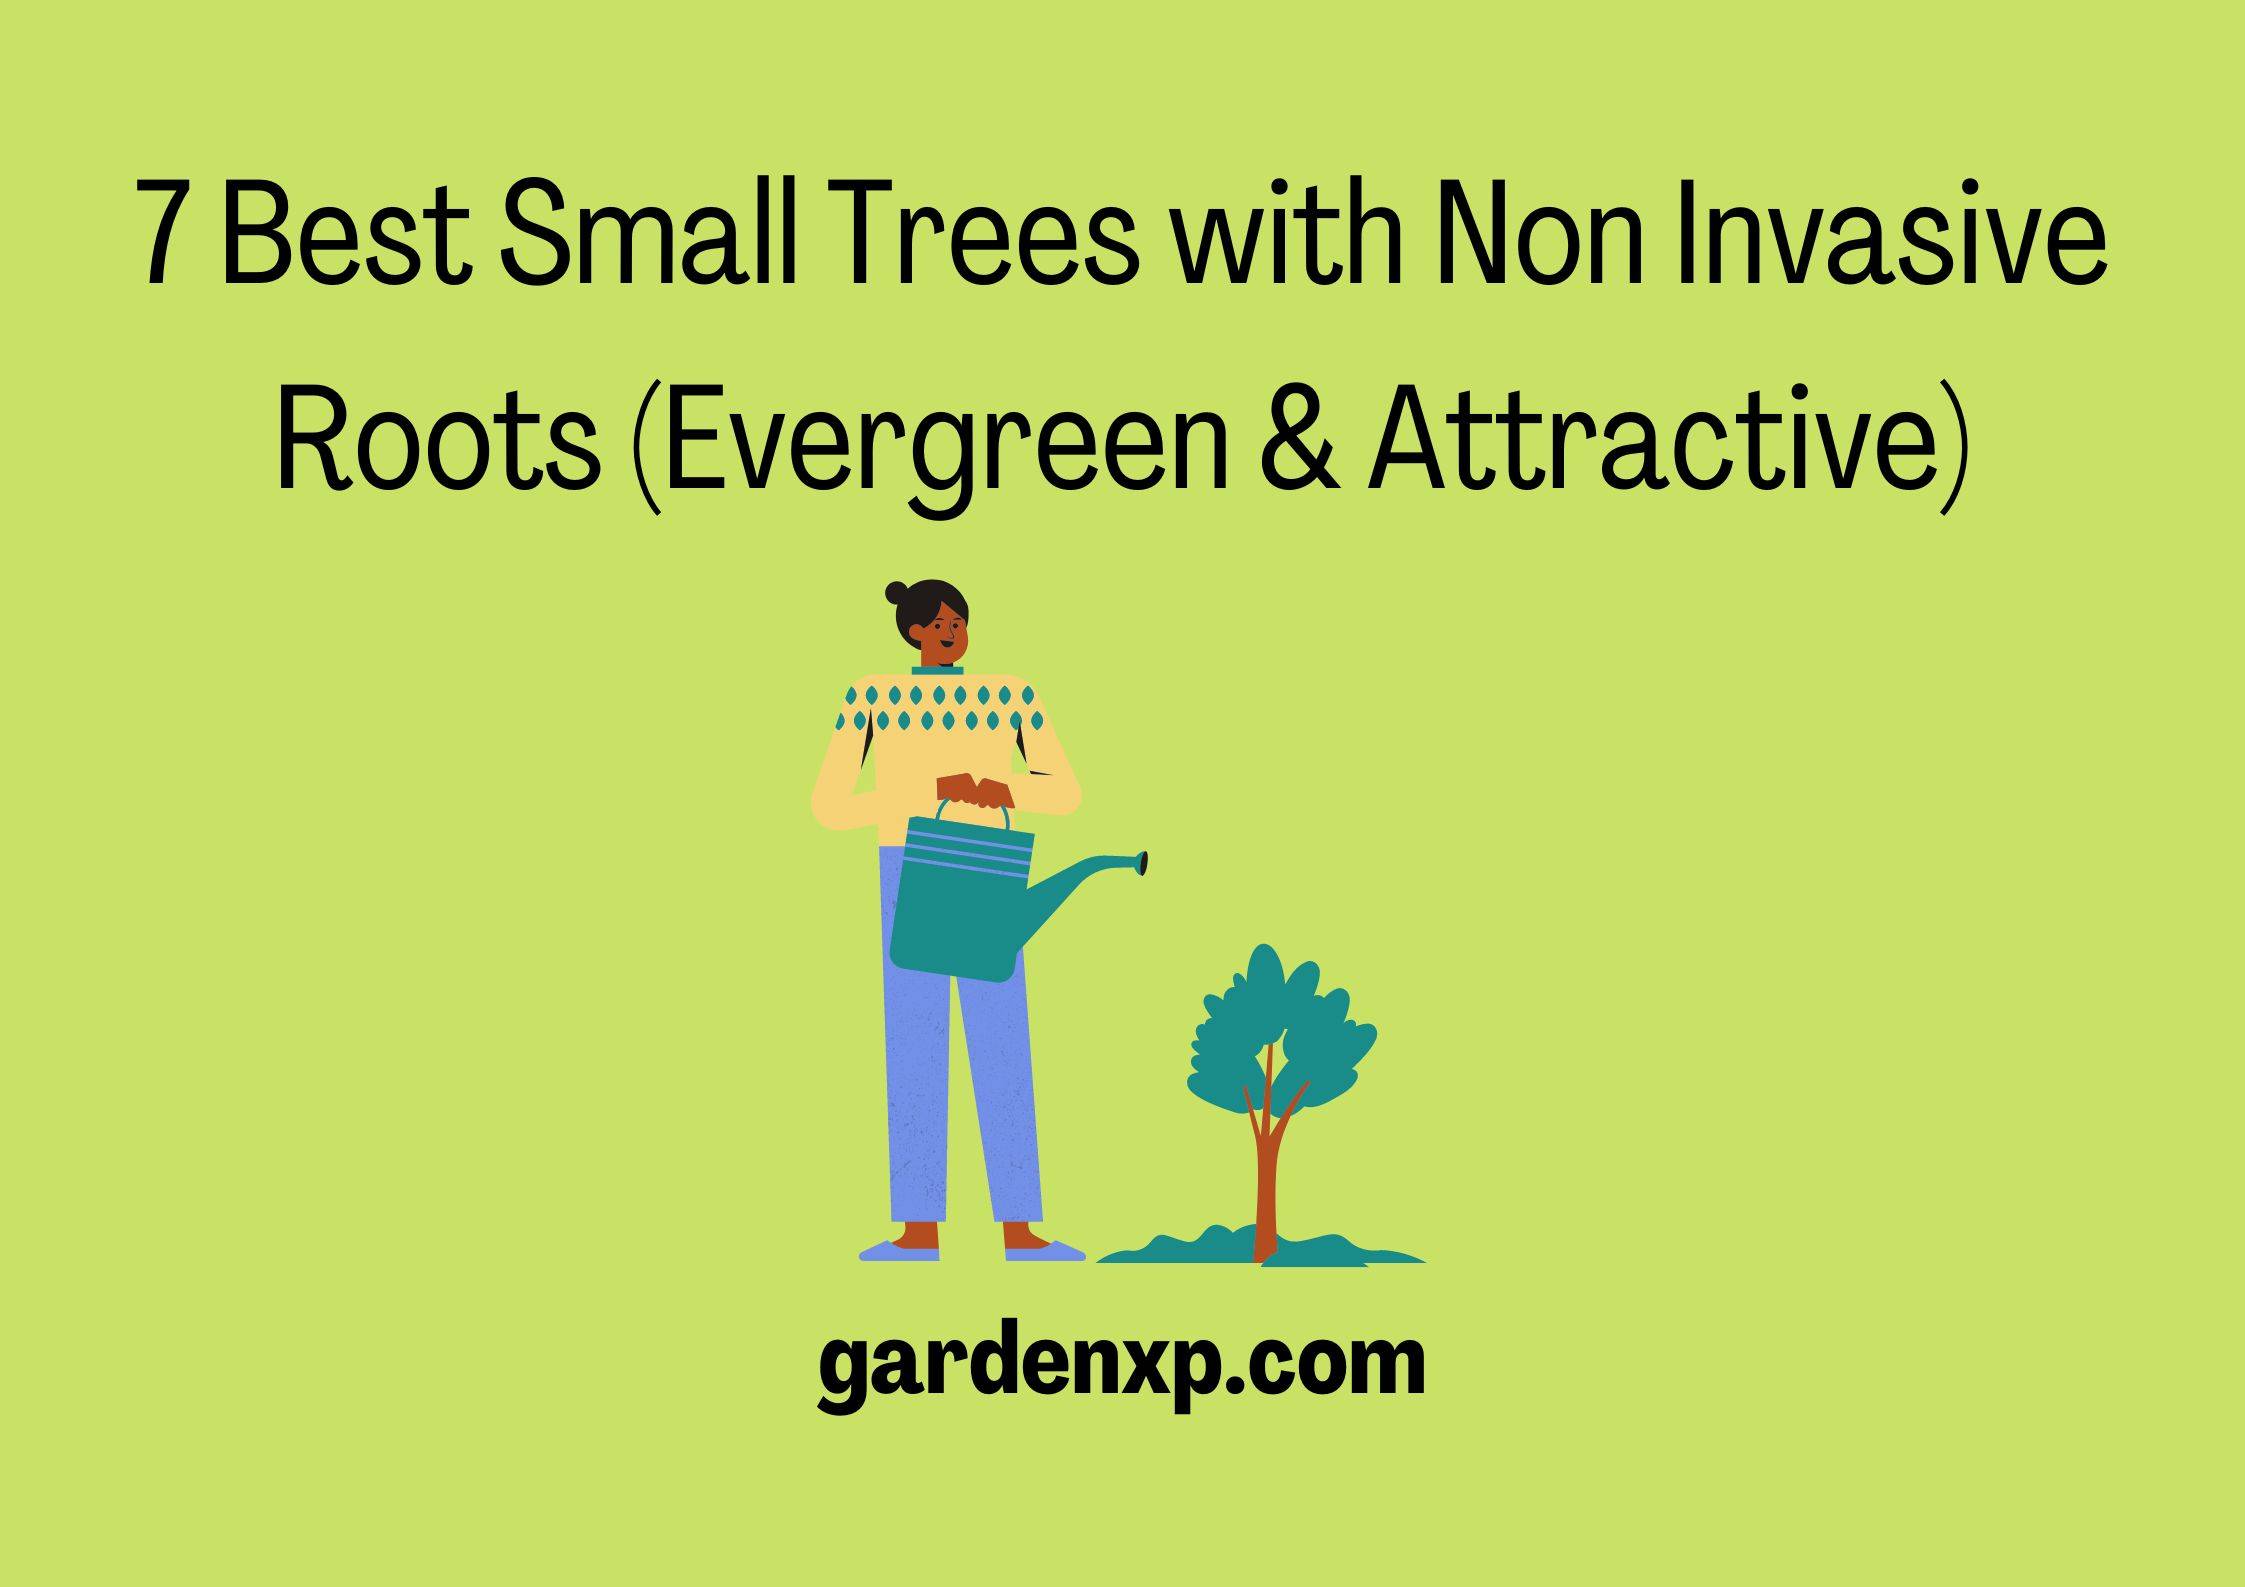 7 Best Small Trees with Non Invasive Roots (Evergreen & Attractive)